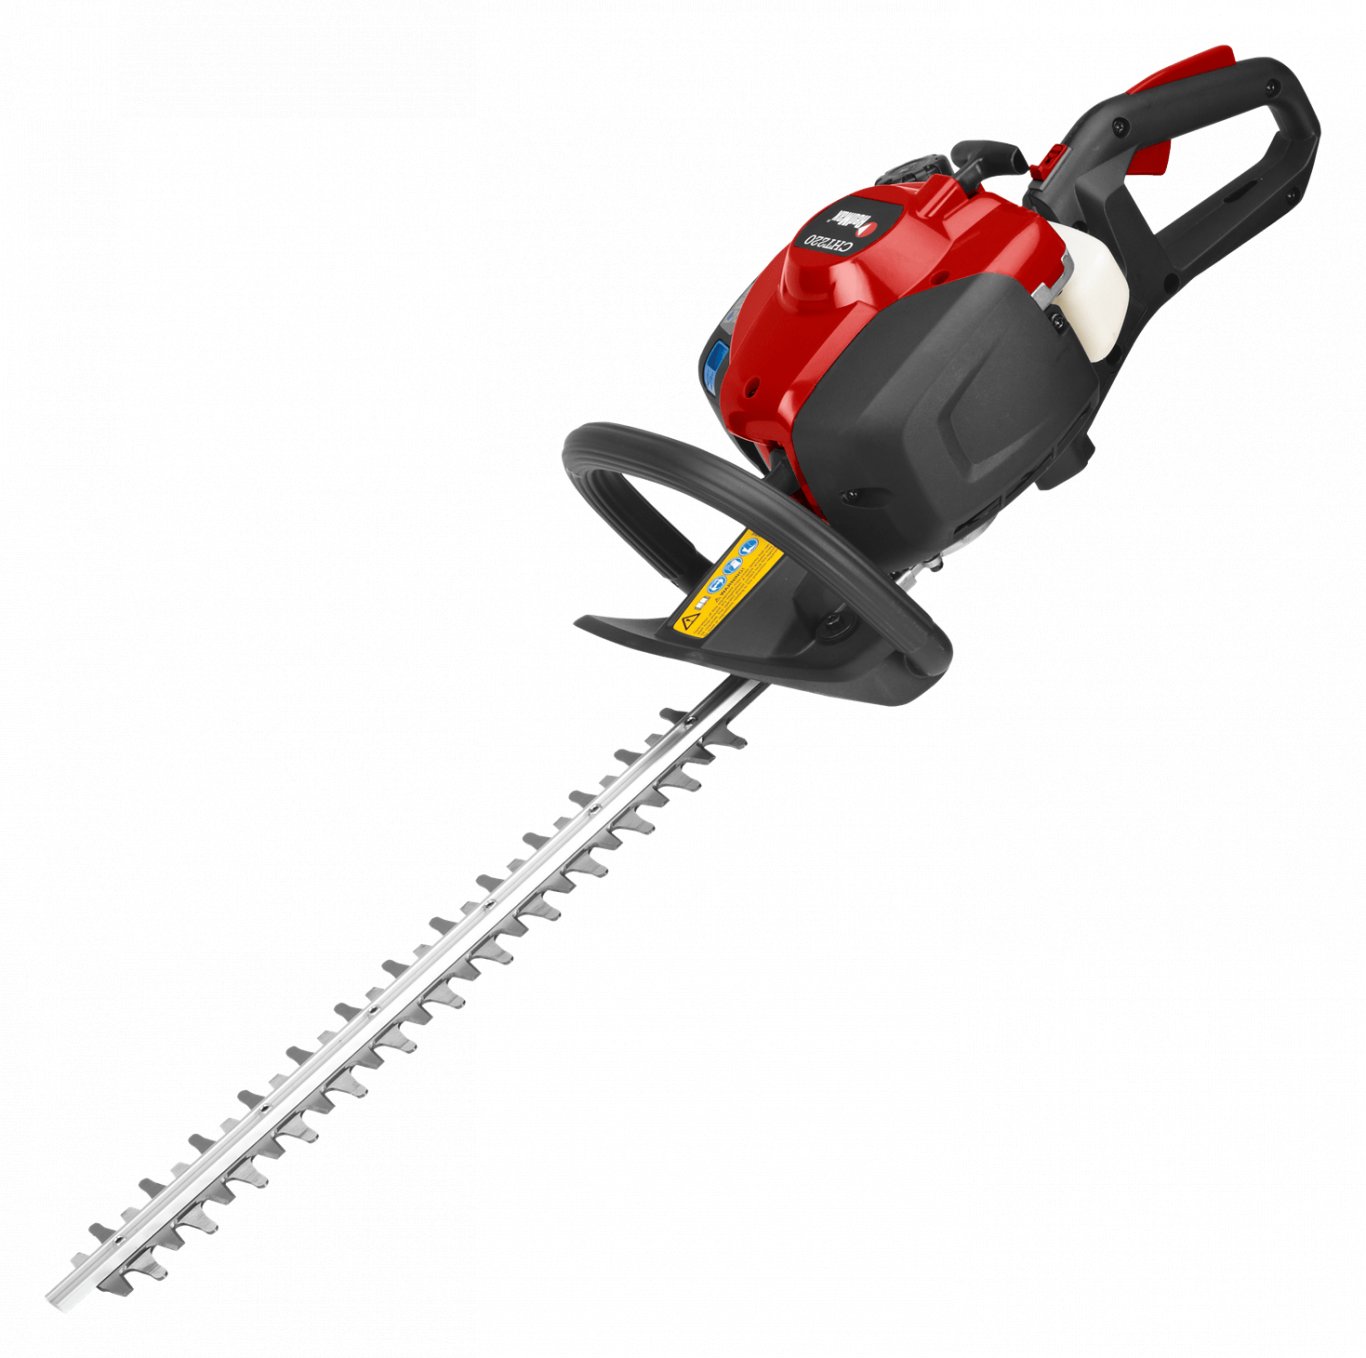 Red Max CHTZ60 23 double sided hedge trimmer